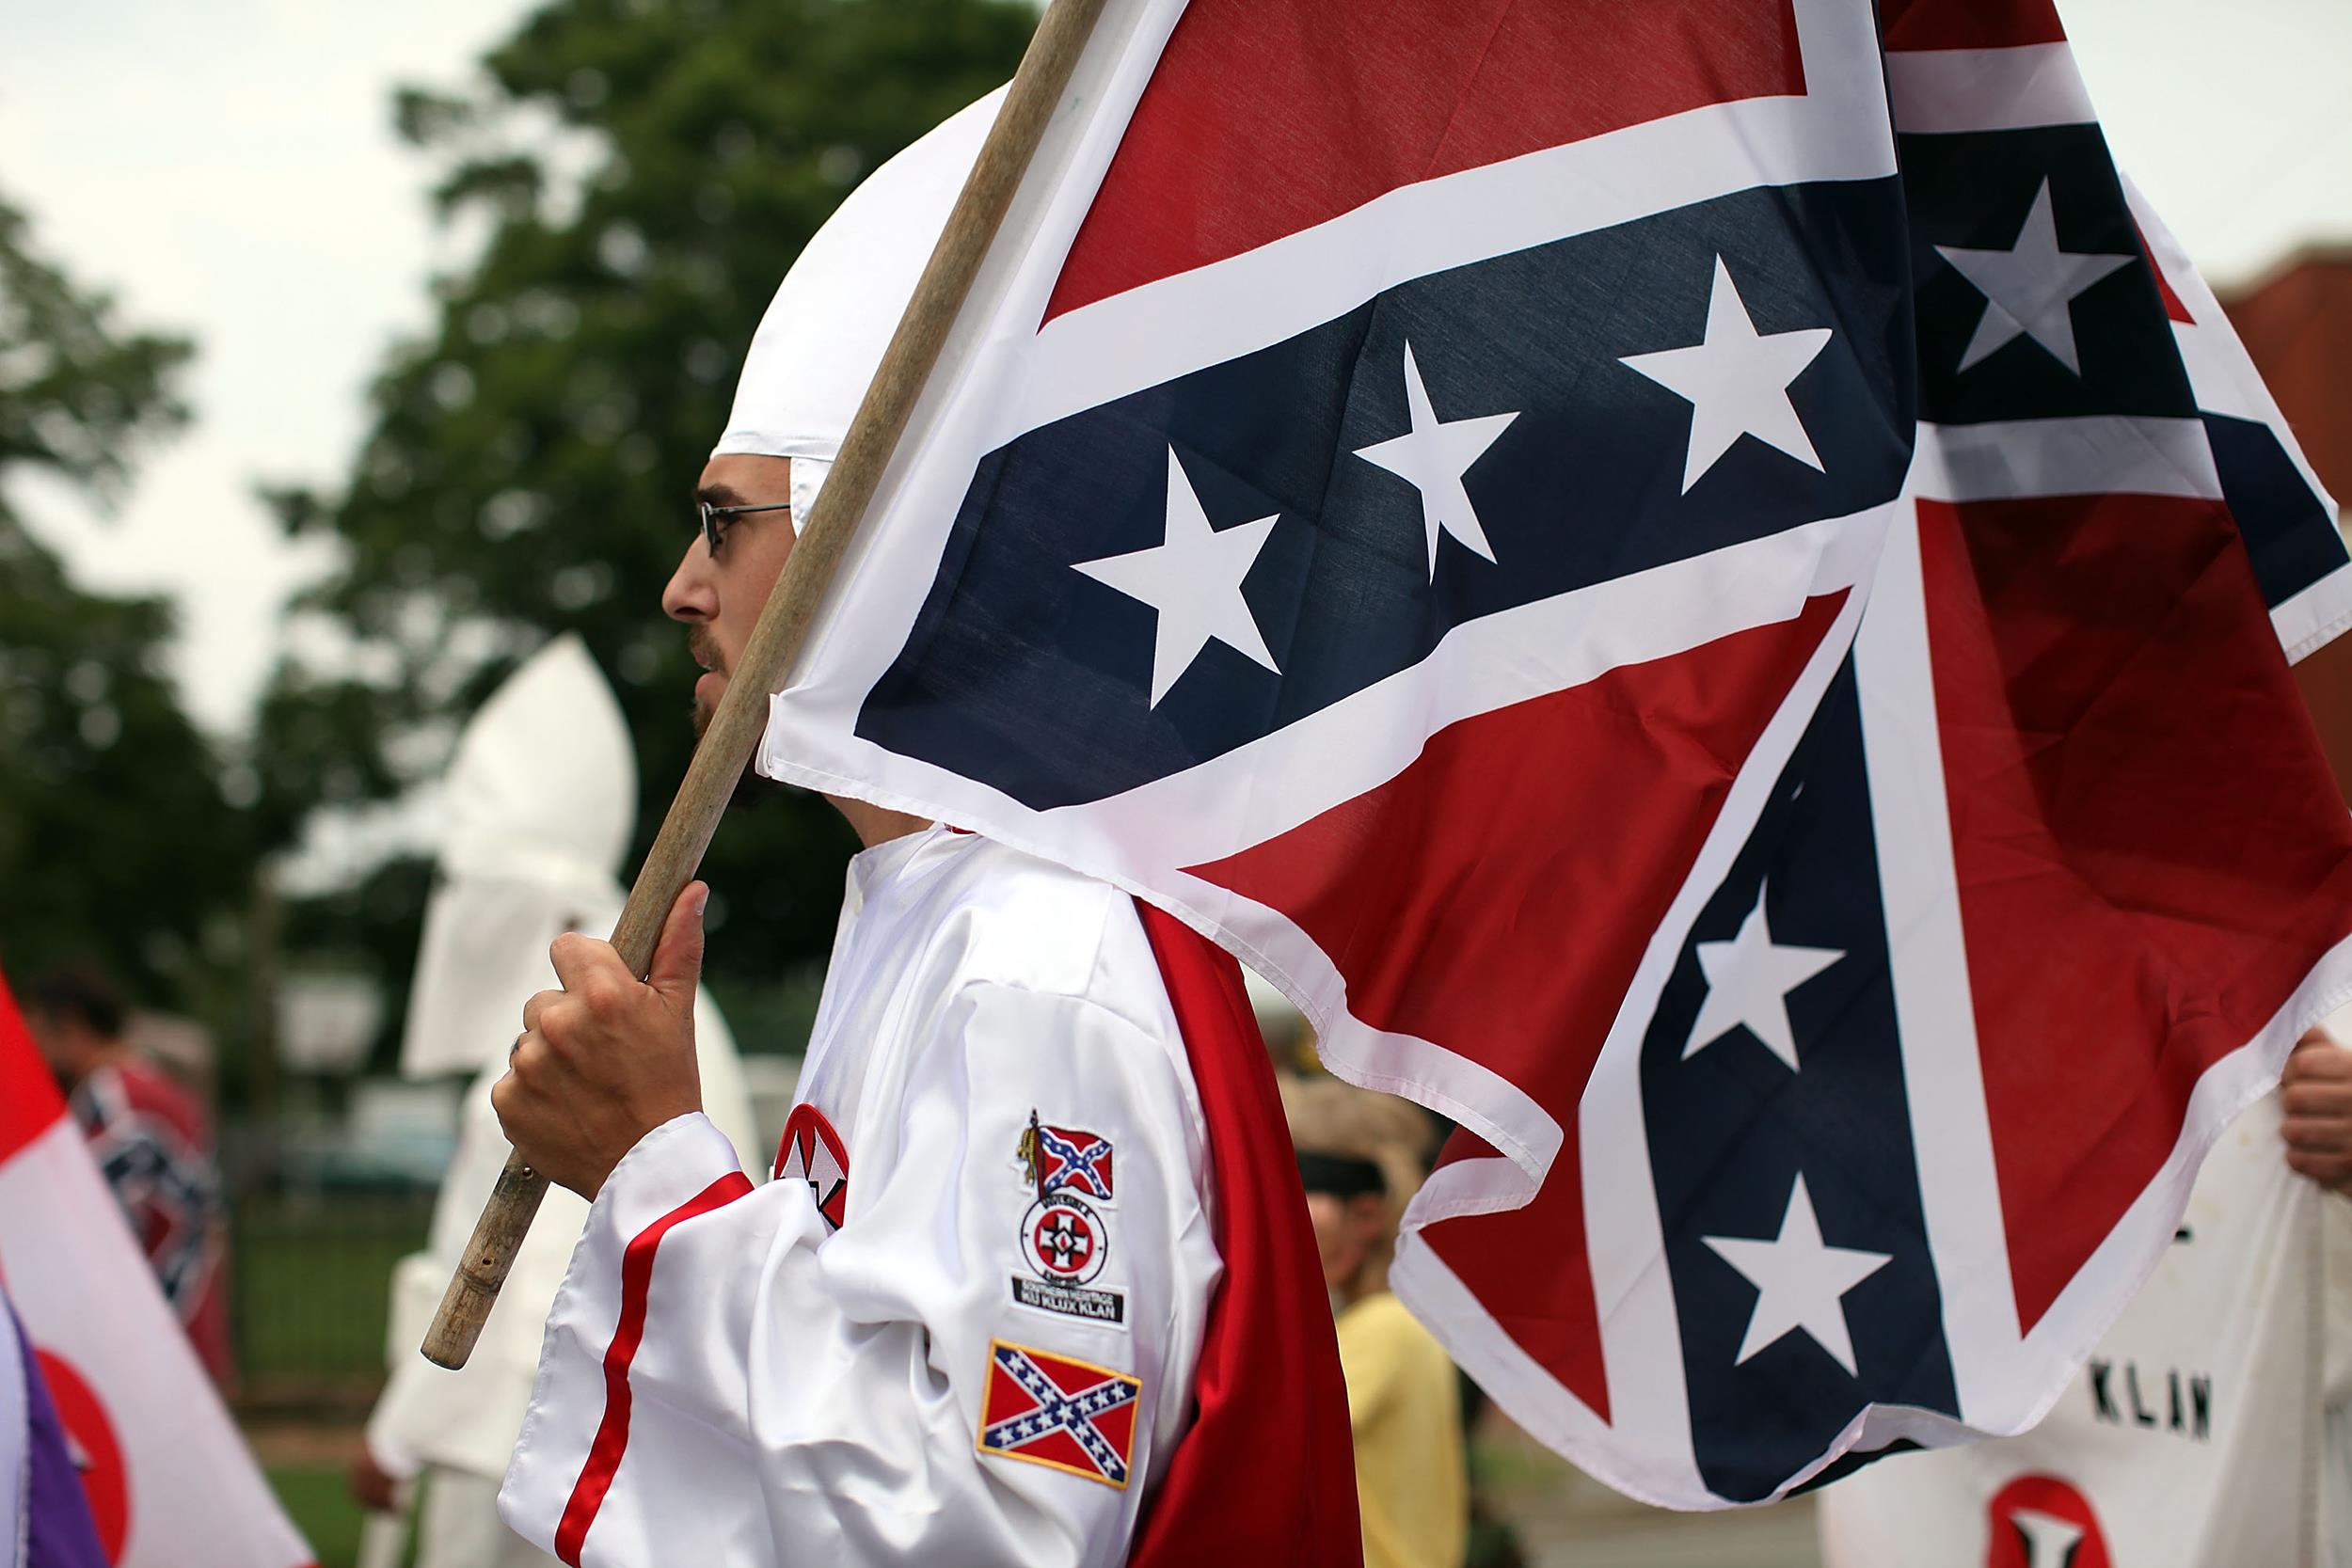 White Nationalism: The New (Old) Rebellion